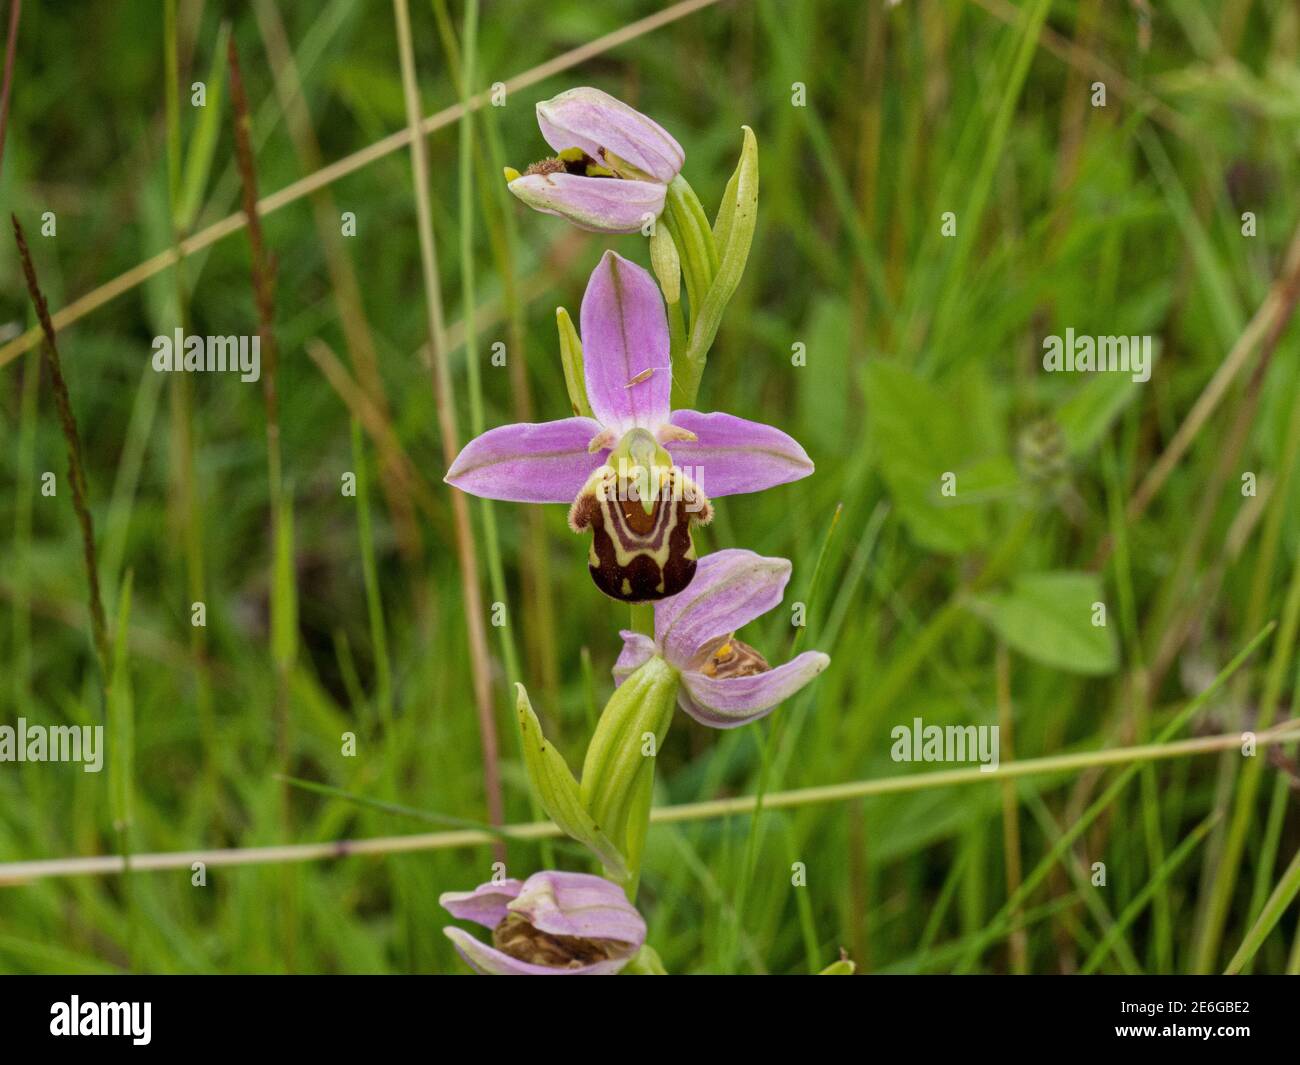 A spike of pink brown flowers of a bee orchid - Ophrys apifera growing in grassland Stock Photo